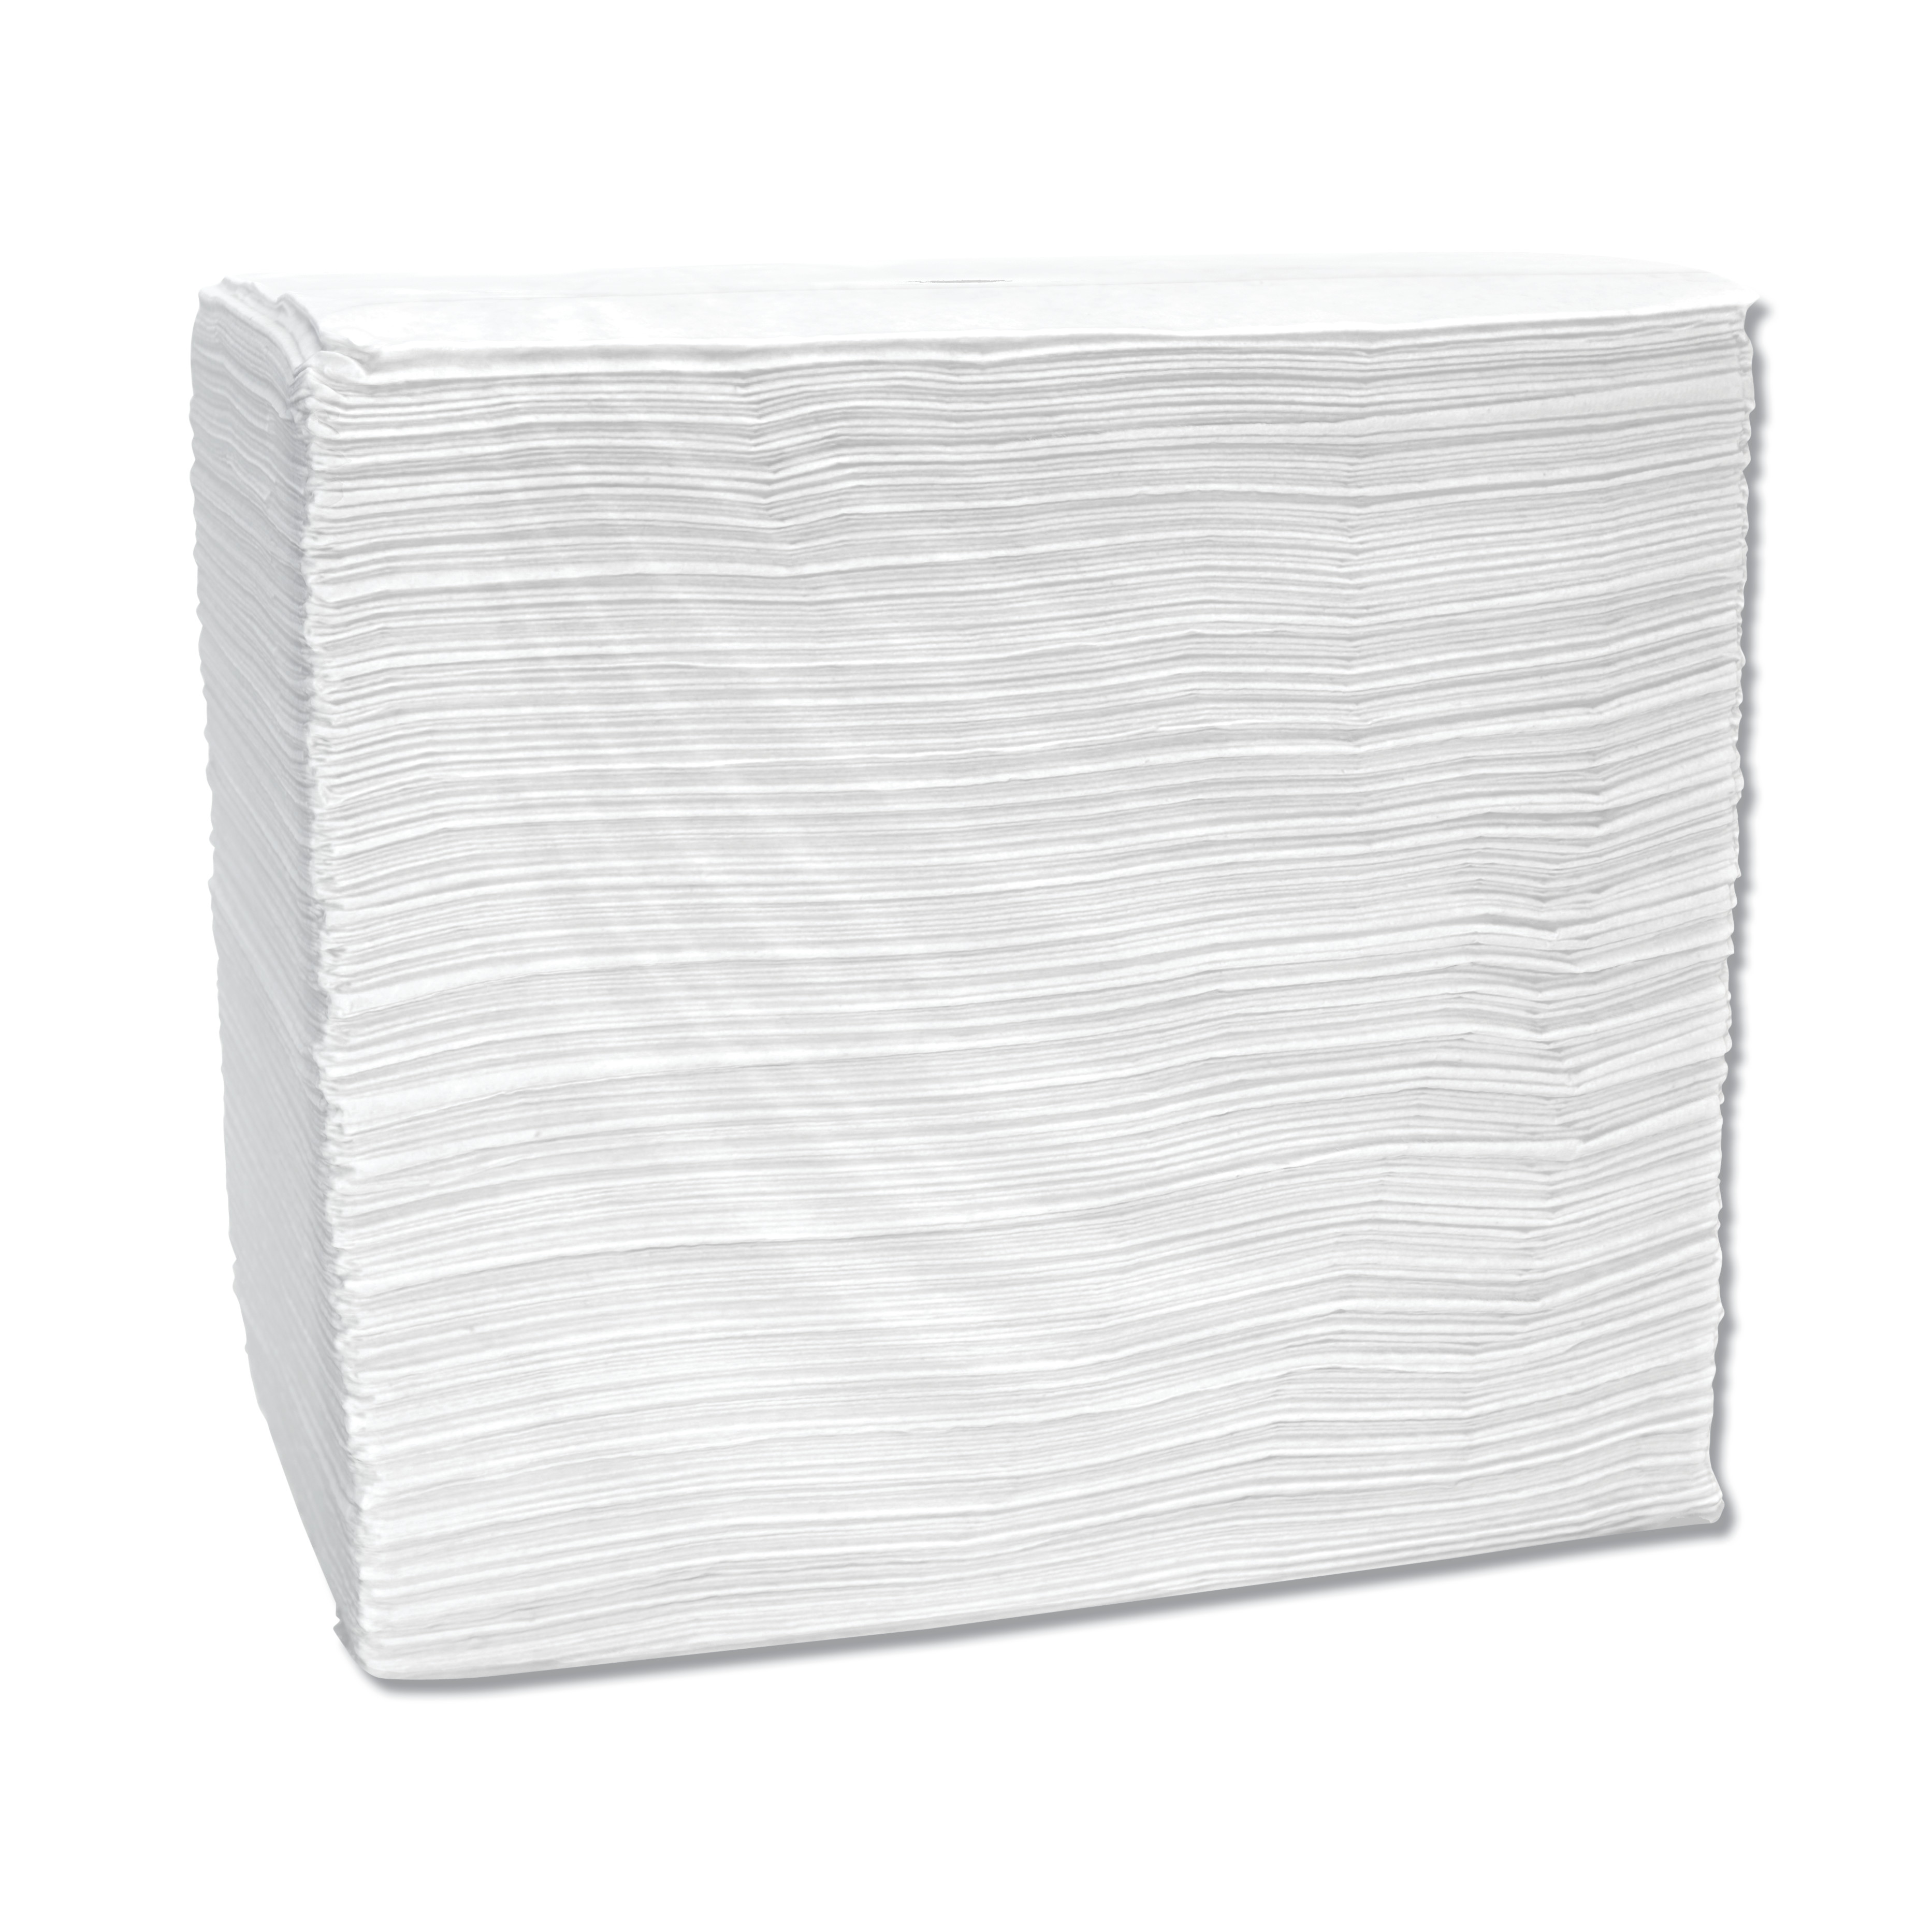  Cascades PRO N696 Signature Airlaid Dinner Napkins/Guest Hand Towels,  15 x 16 3/4, White, 504/CT (CSDN696) 